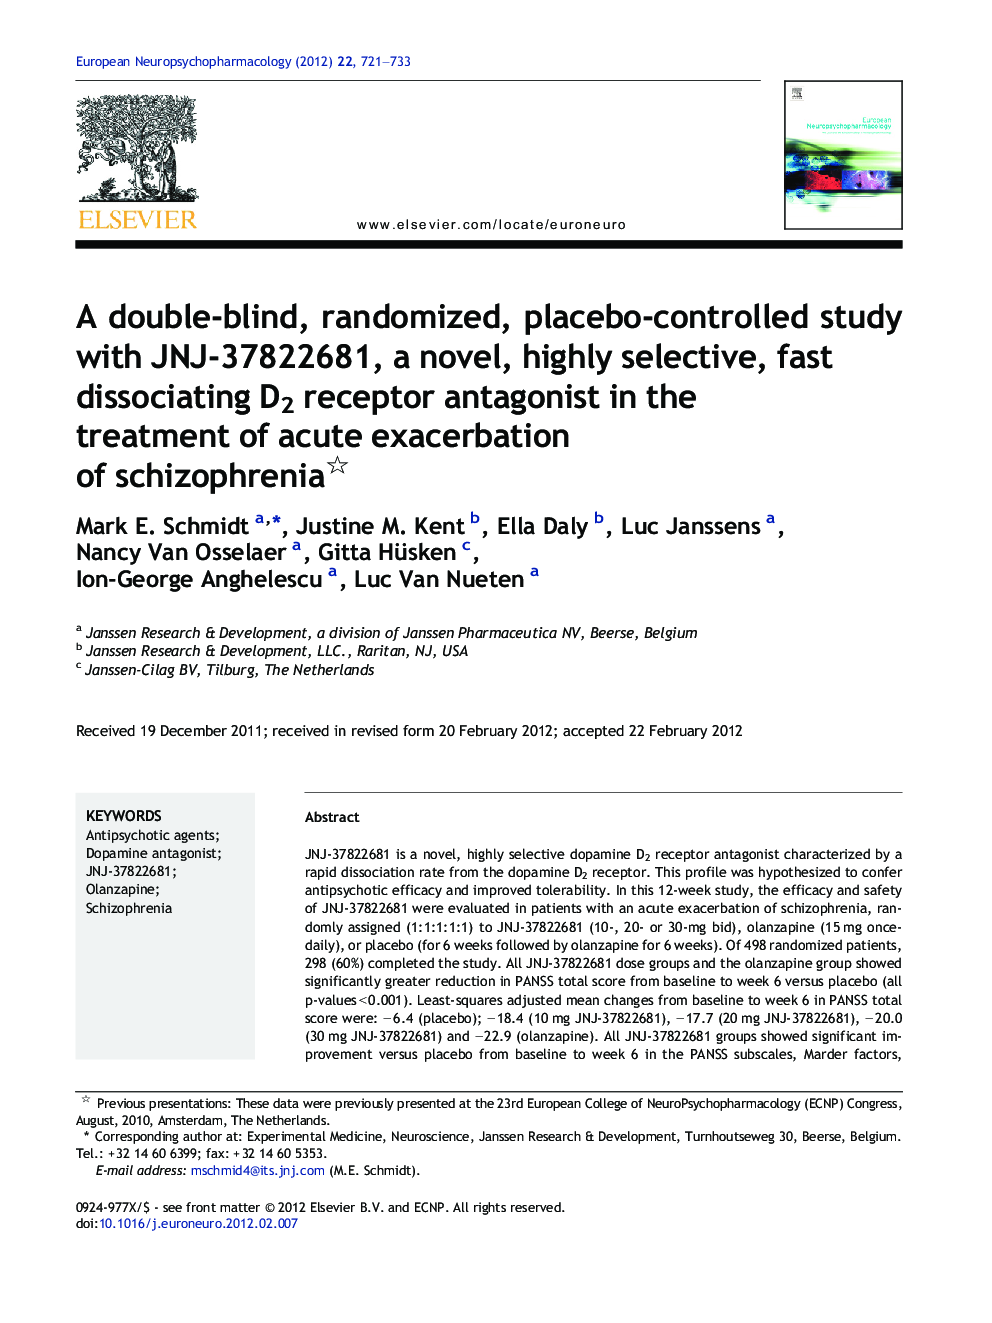 A double-blind, randomized, placebo-controlled study with JNJ-37822681, a novel, highly selective, fast dissociating D2 receptor antagonist in the treatment of acute exacerbation of schizophrenia 